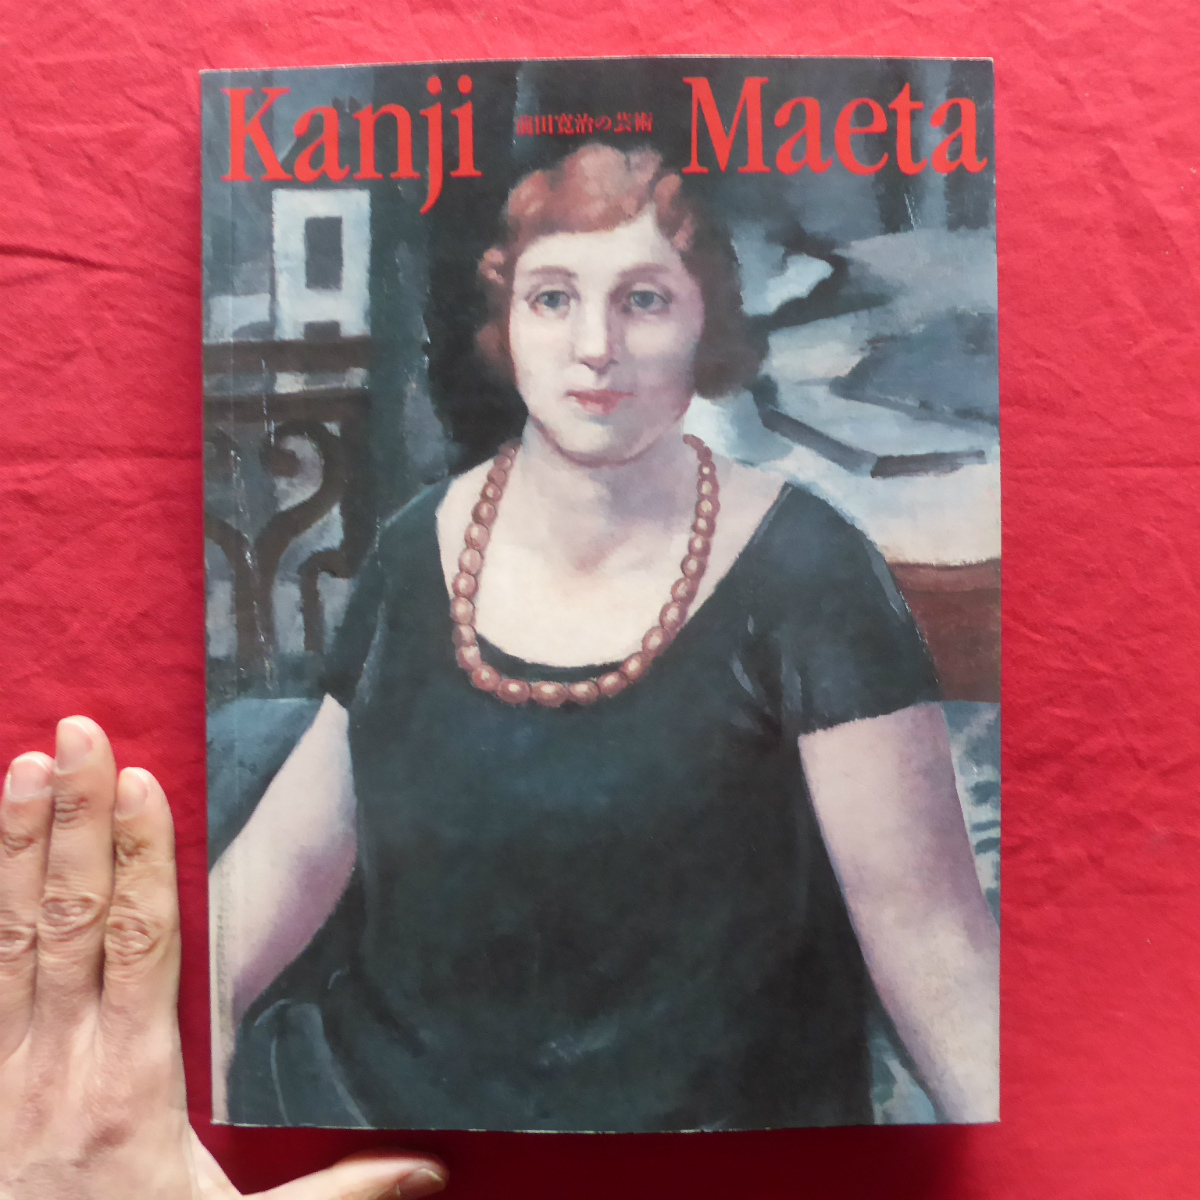 i3 Catalog [Maeda Kanji's Art Exhibition - Poetry and Form/1999] Maeda Kanji and the French Art World in the Early 1920s/Maeda Kanji and the 1930 Association, Painting, Art Book, Collection, Catalog